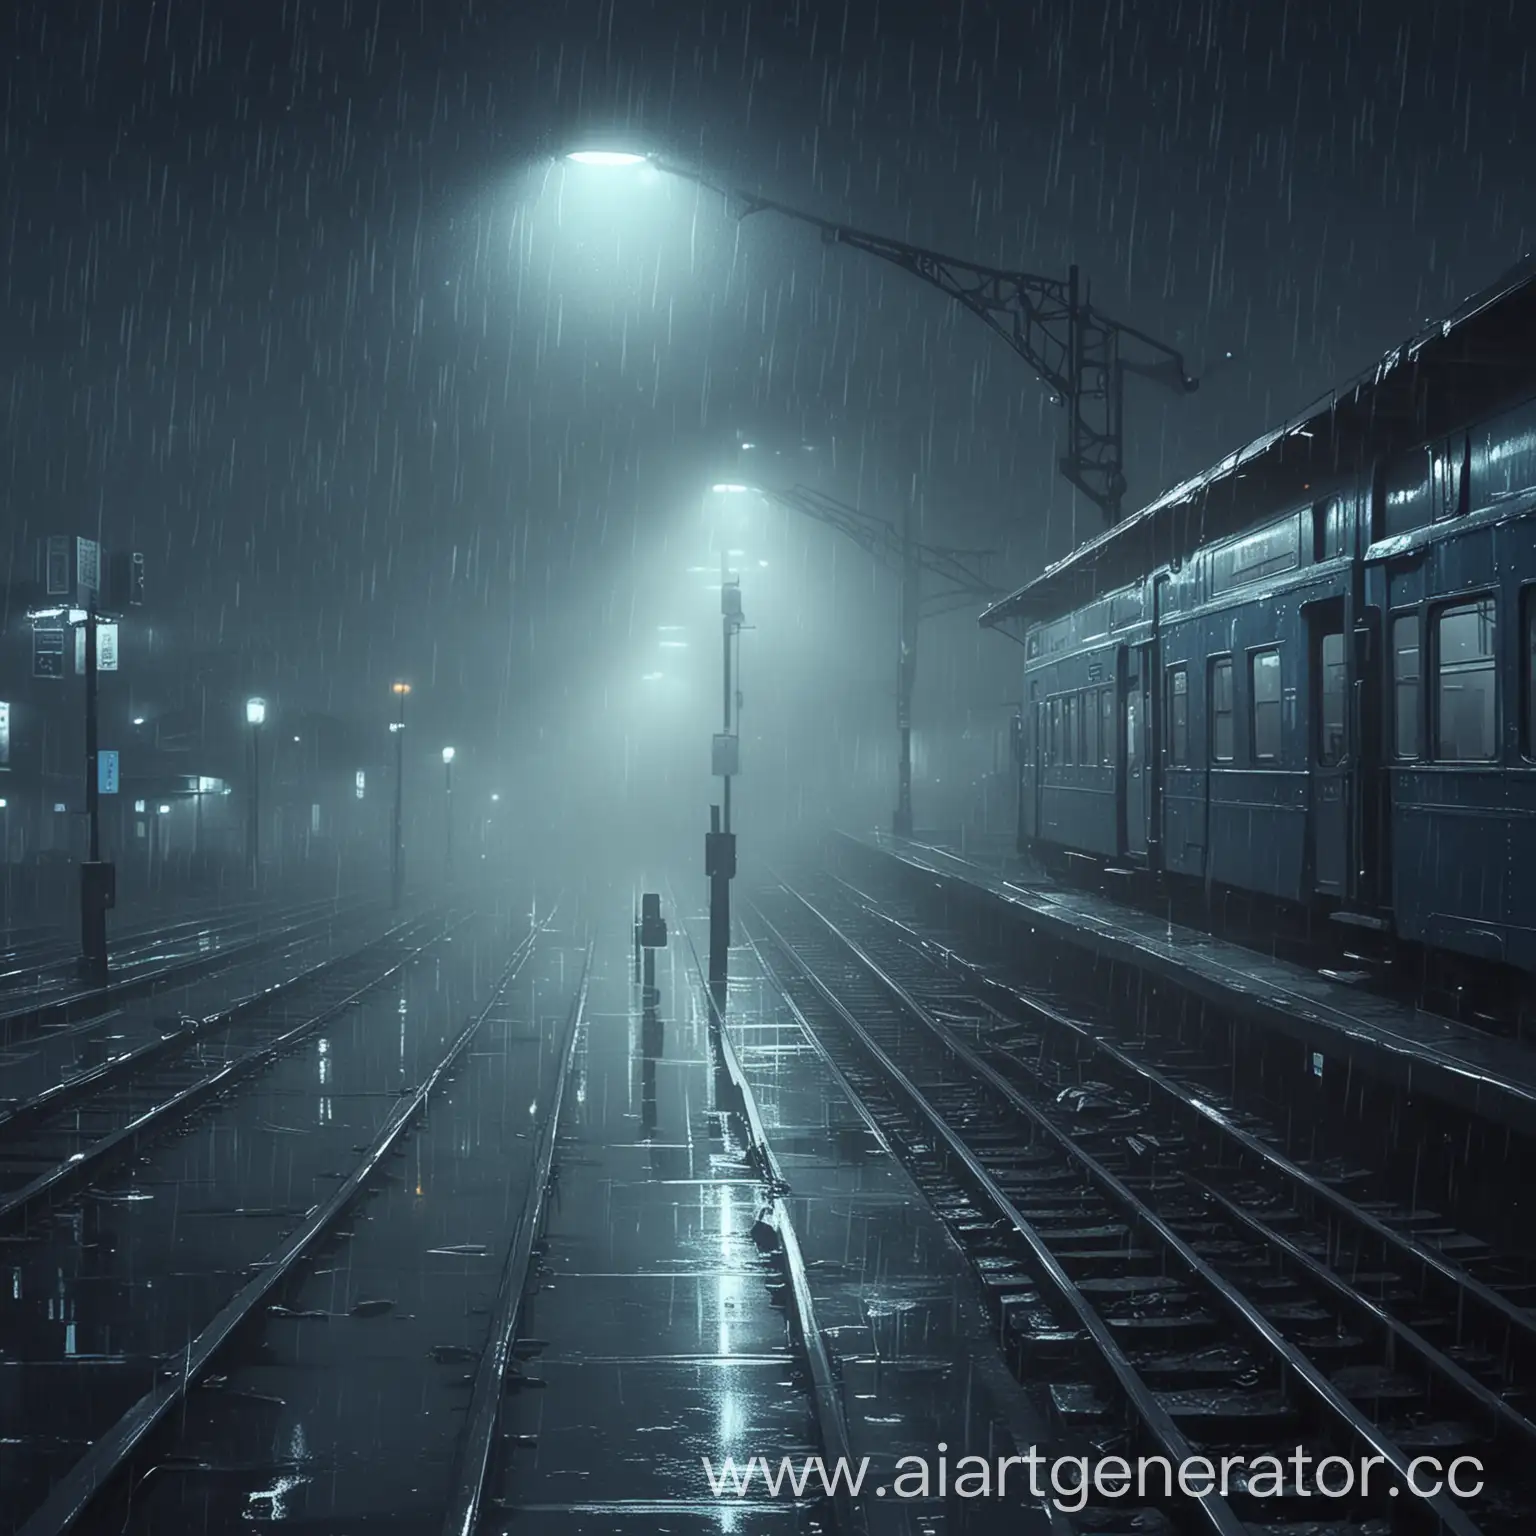 Desolate-Train-Station-at-Night-Waiting-Train-in-Anime-Style